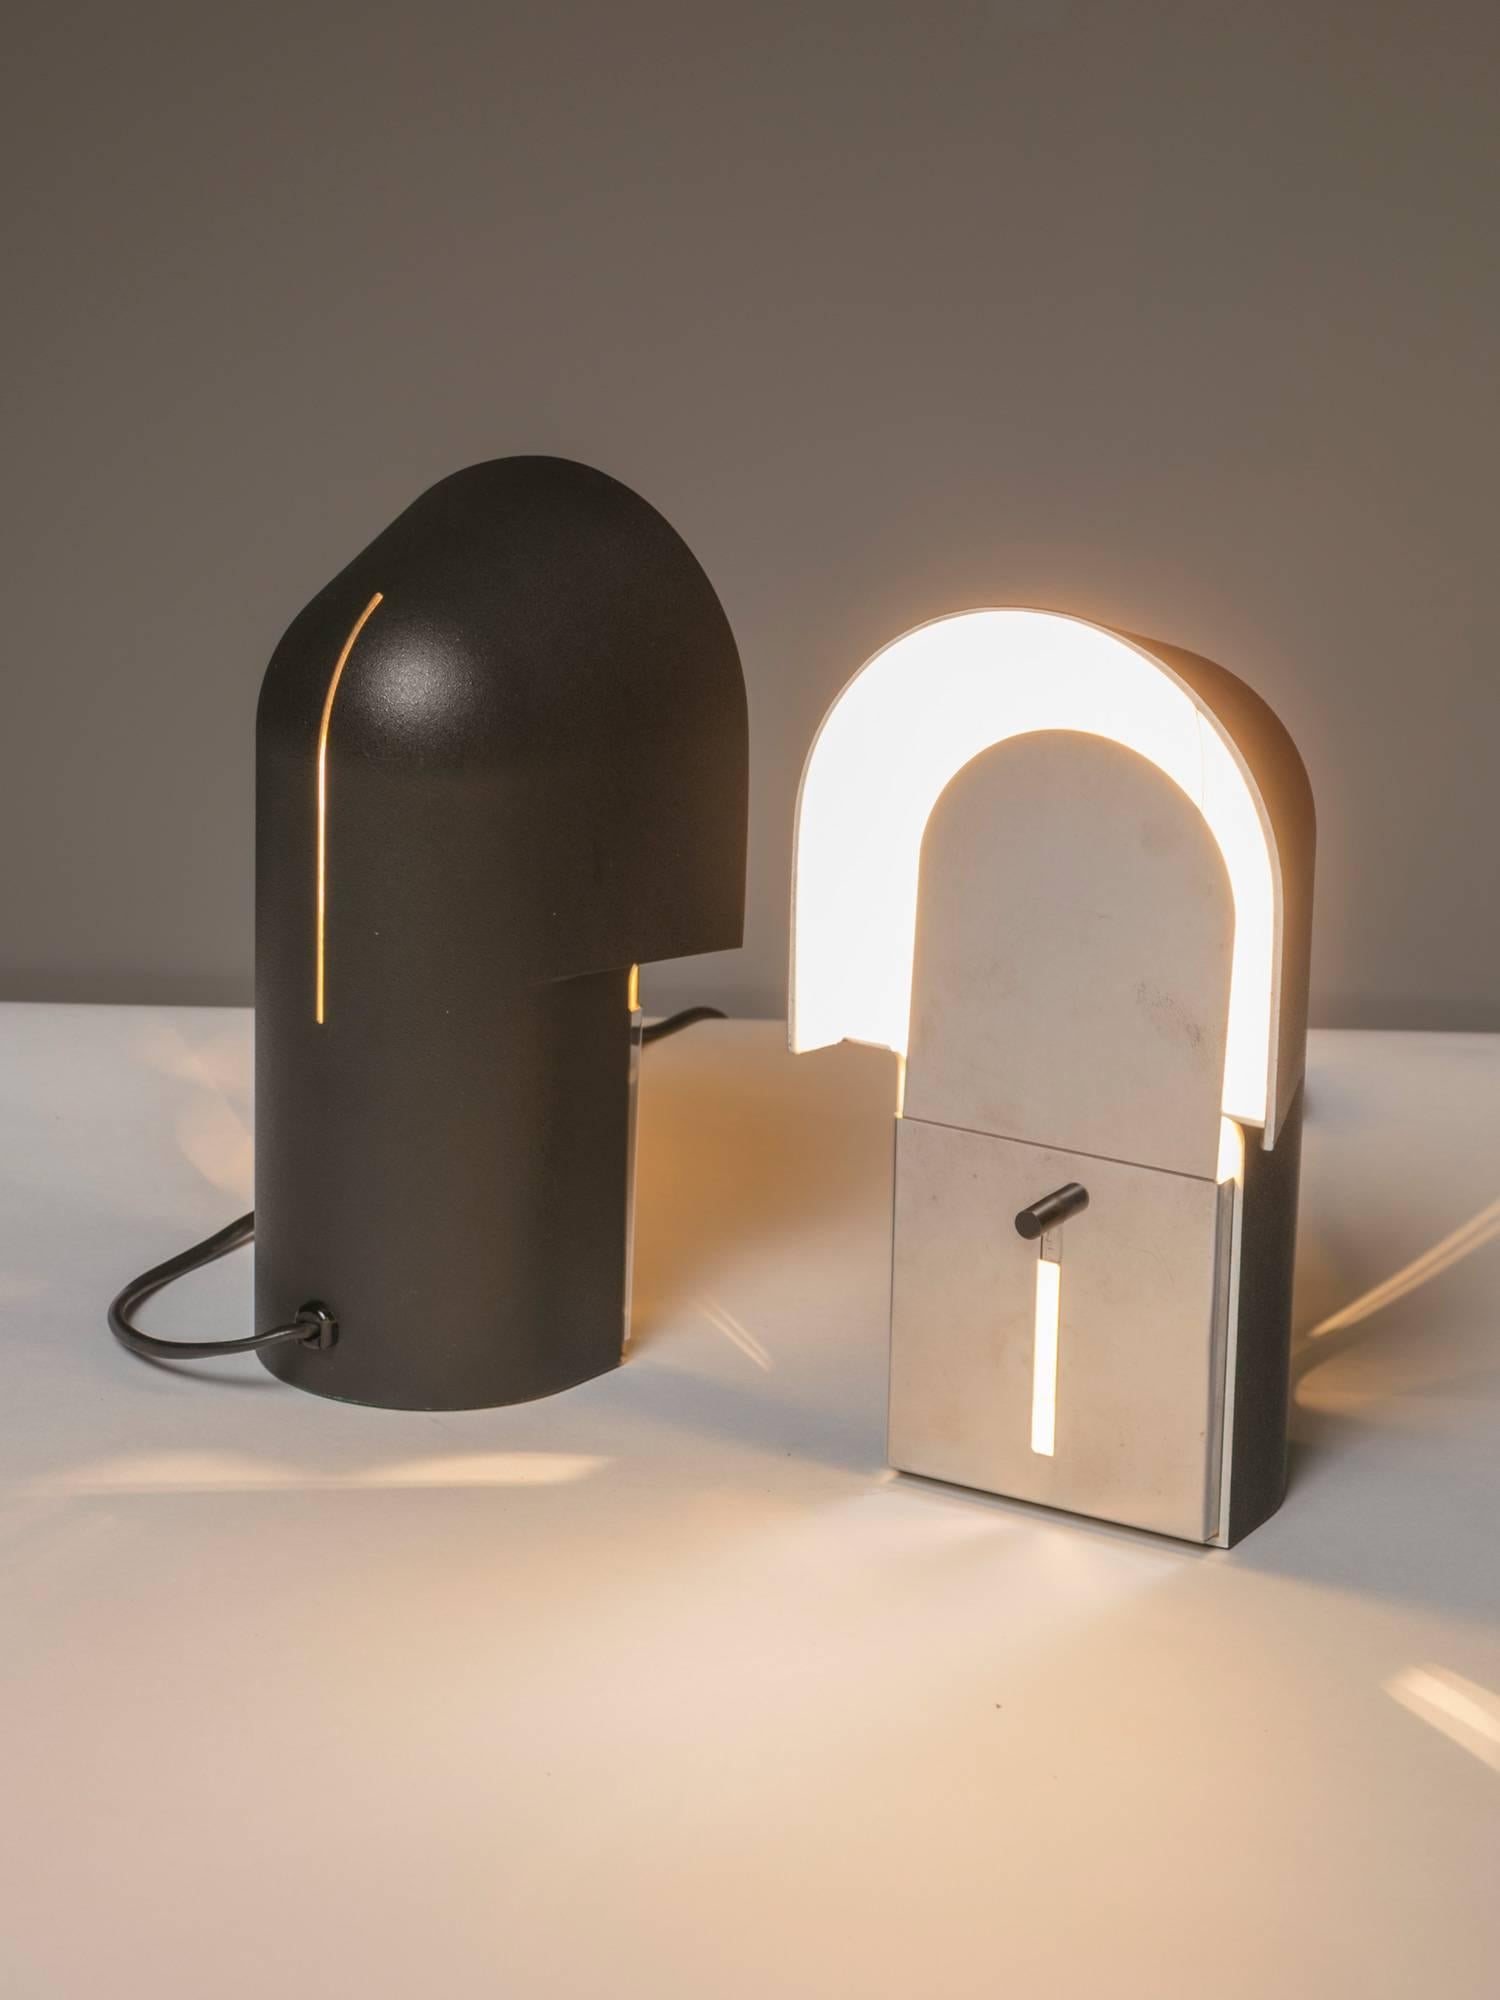 Rare pair of Pala lamps by Corrado and Luigi Aroldi for Luci.
Shade has a steel movable screen to adjust light intensity.
Simple, strong industrial design piece.